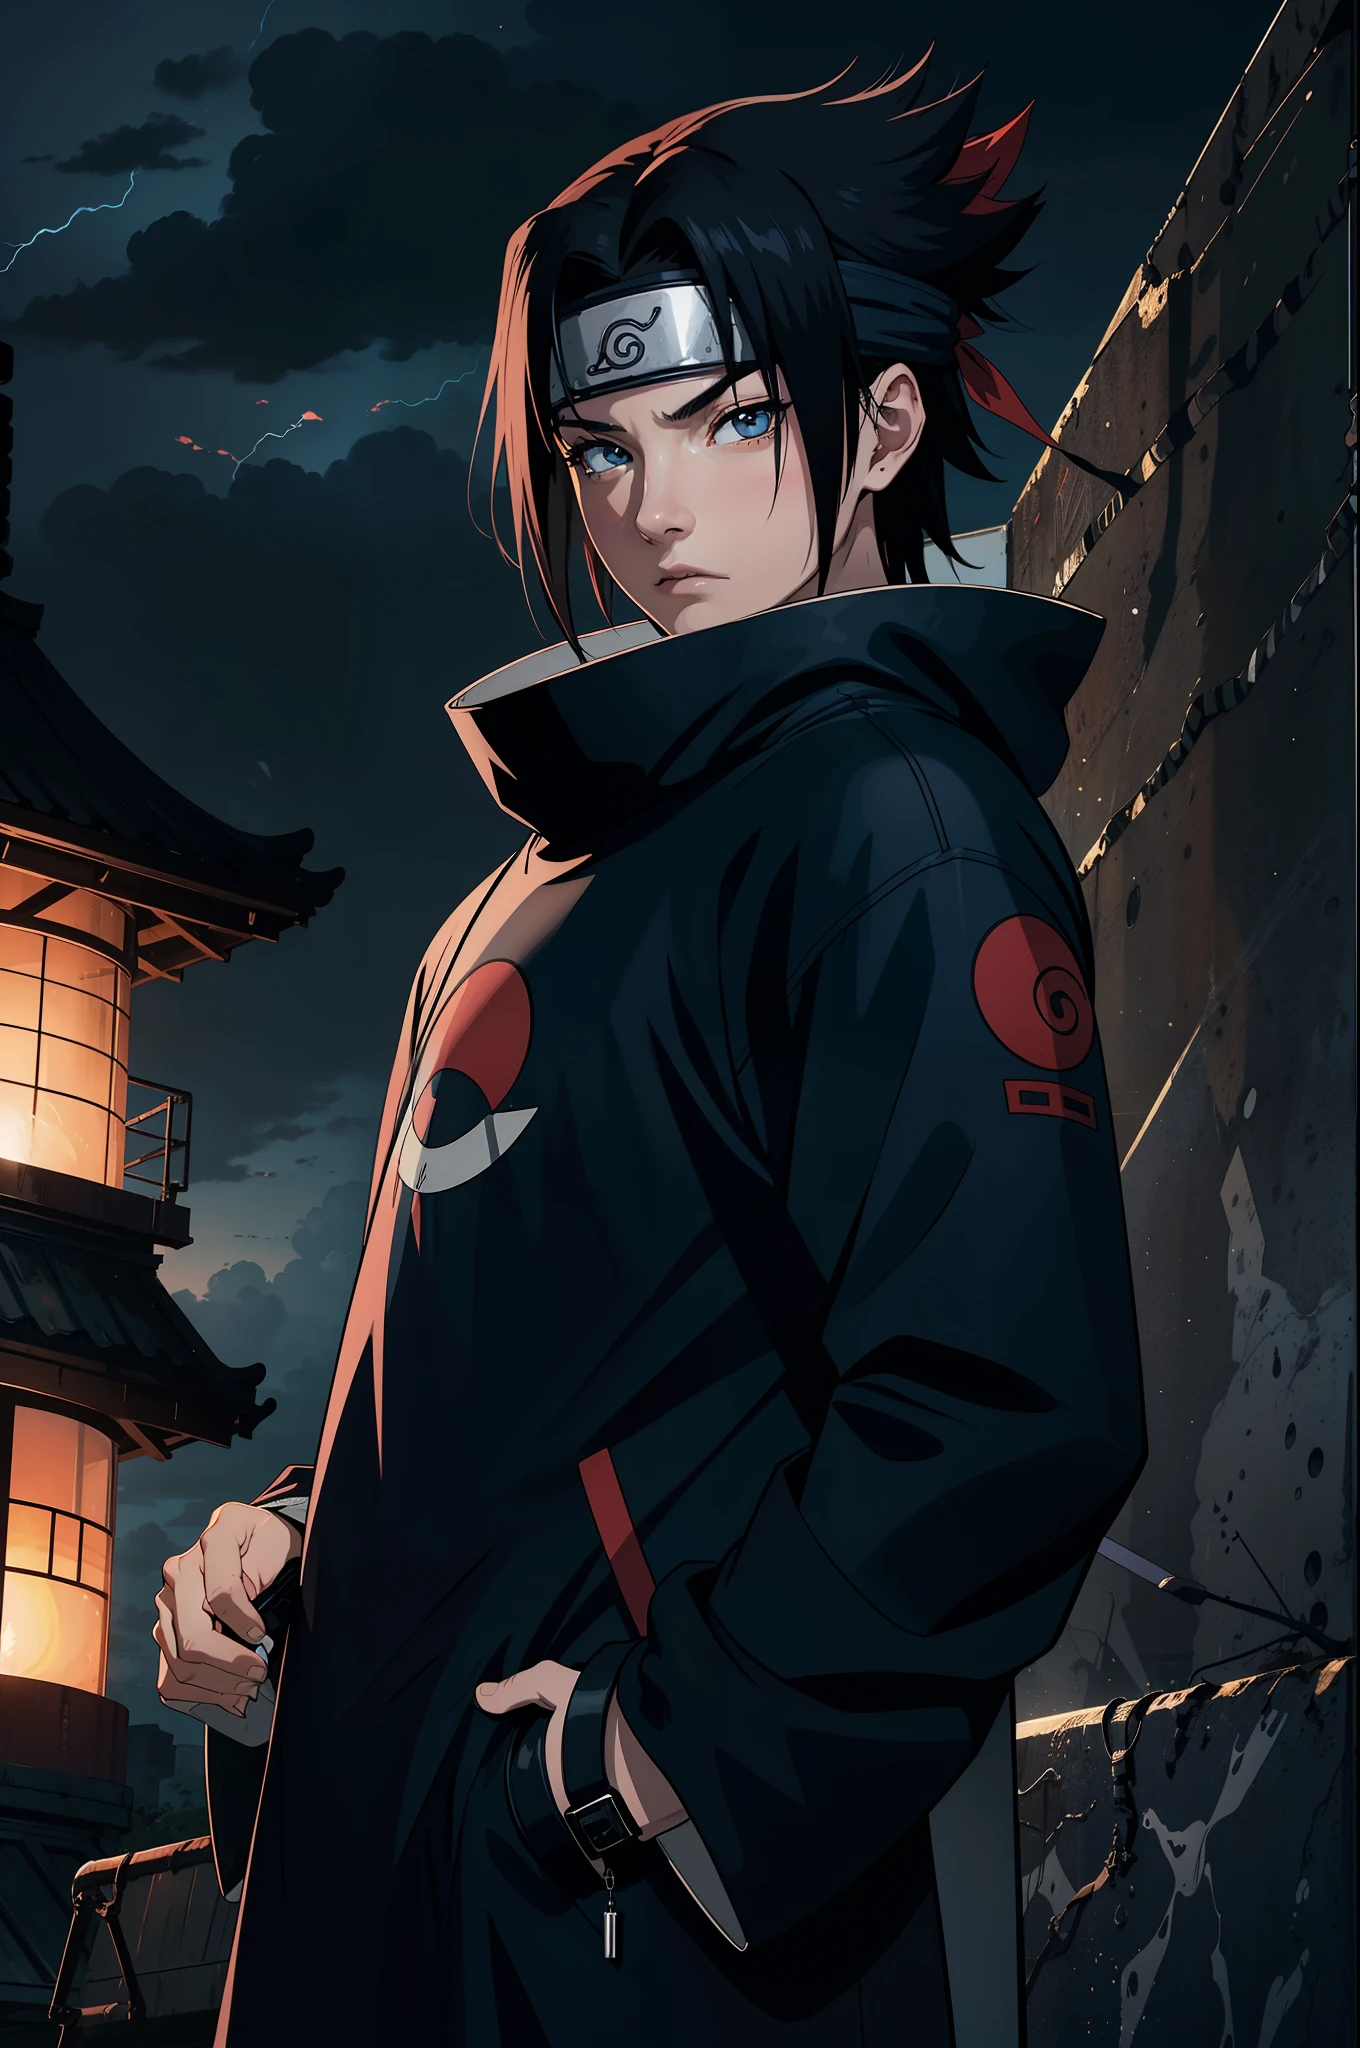 (best quality,highres,realistic:1.2),Uchiha Sasuke,masterpiece,anime,portrait,dark,vivid colors,sharingan,black hair,long and straight hair,expressive eyes,piercing gaze,serious expression,stoic,cool and calm,red and white Uchiha crest on the back,shoulder-length hair,black cloak with high collar and red clouds,traditional Japanese clothing,katana in hand,standing in a dramatic pose,amidst swirling black flames,background of thunderstorm and dark clouds,post-battle scene,strong lighting casting shadows,crackling lightning,haunting atmosphere,sharp focus,extreme detail description